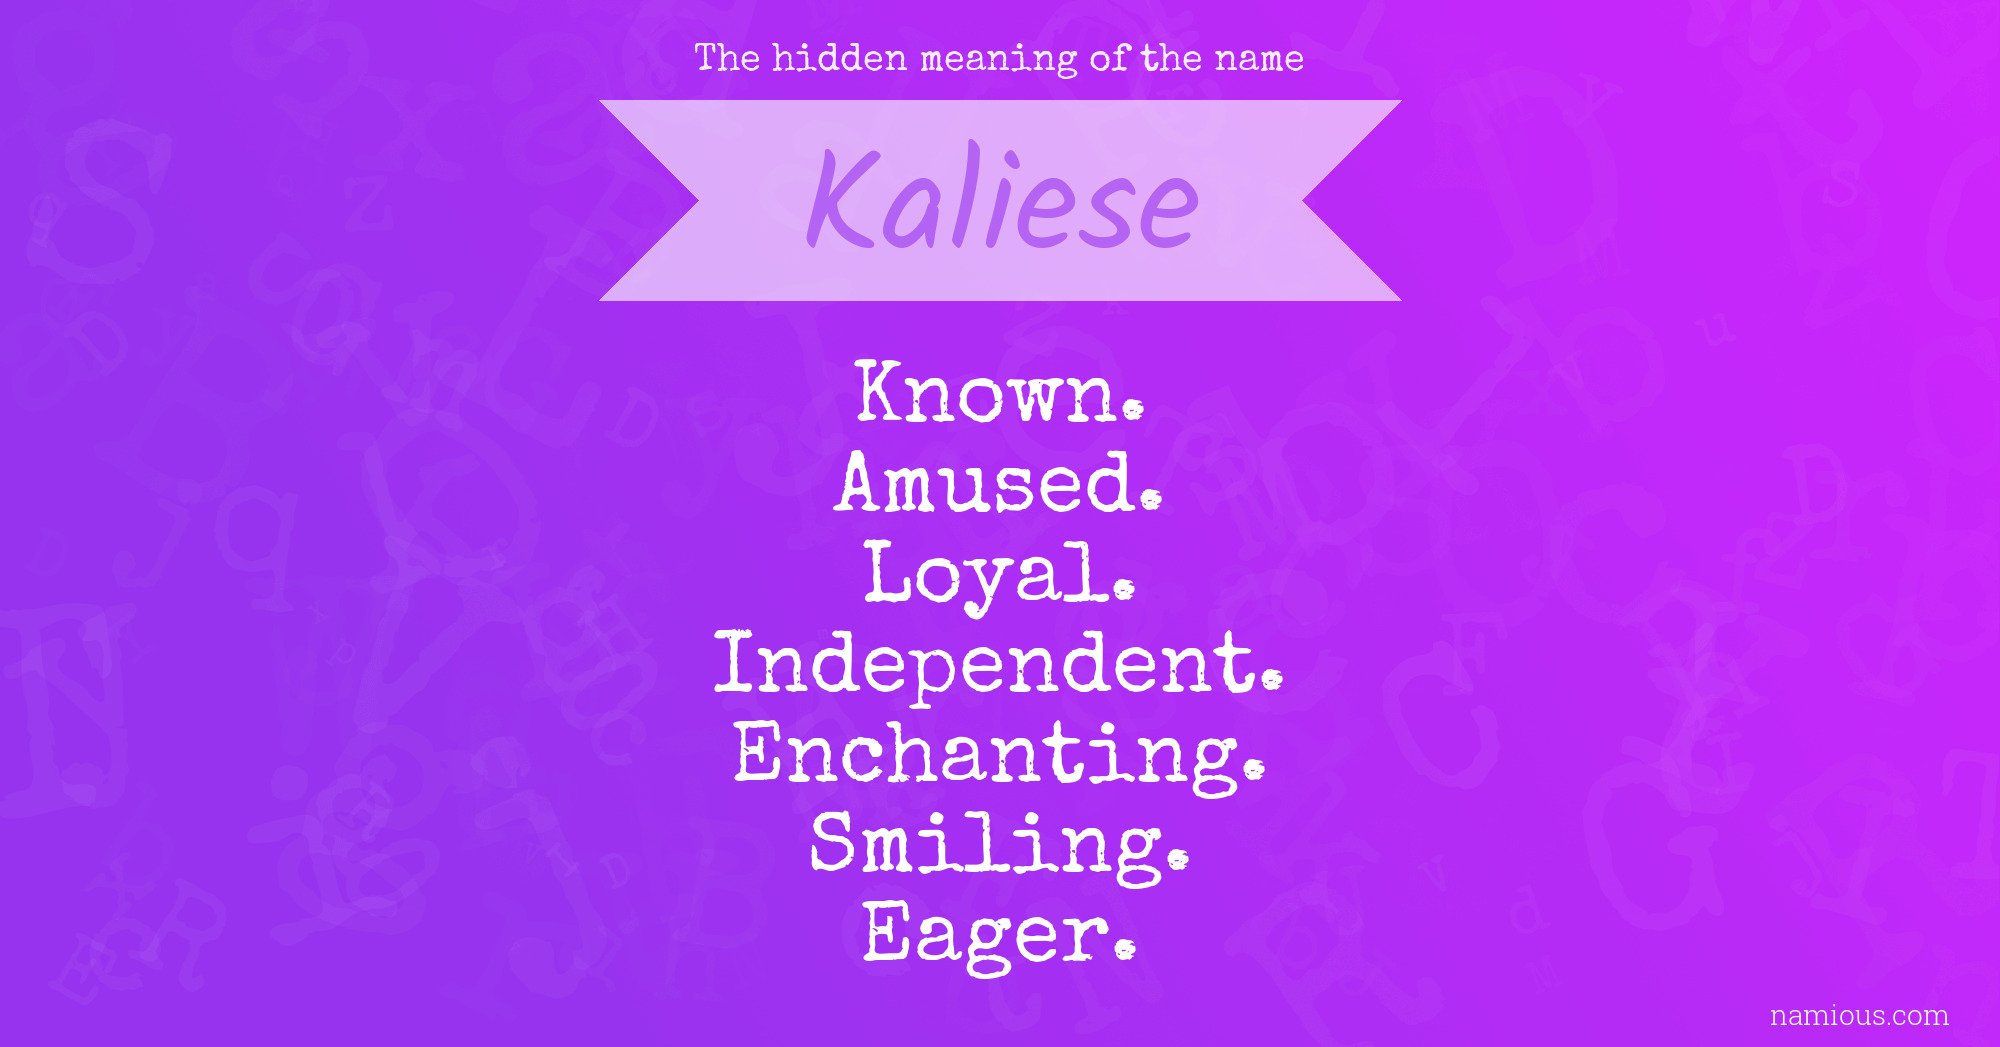 The hidden meaning of the name Kaliese